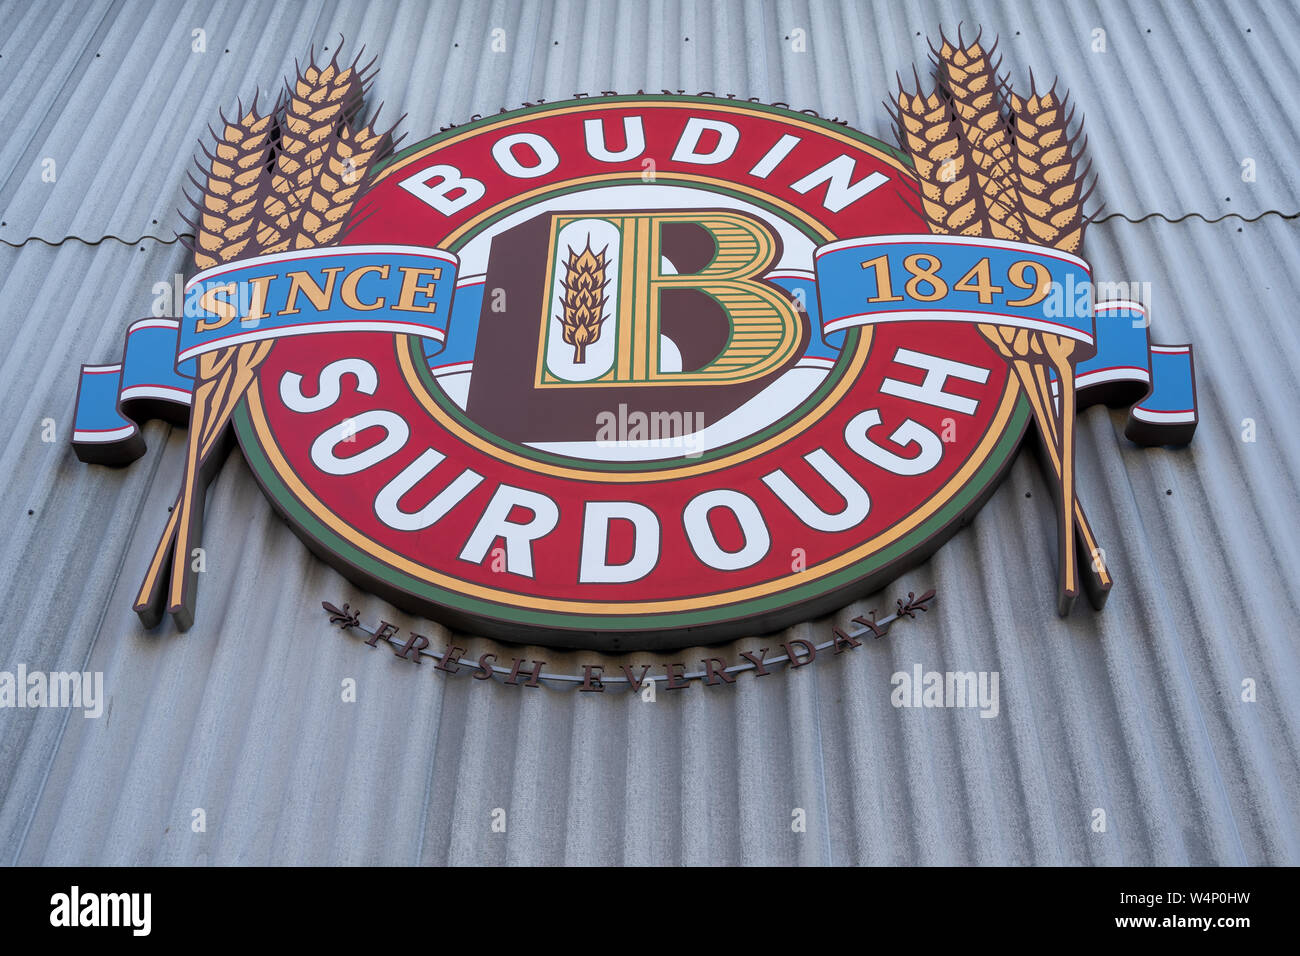 San Francisco, California - July 10, 2019: Close up of the Boudin Sourdough restaurant logo, famous in the Fishermans Wharf area Stock Photo